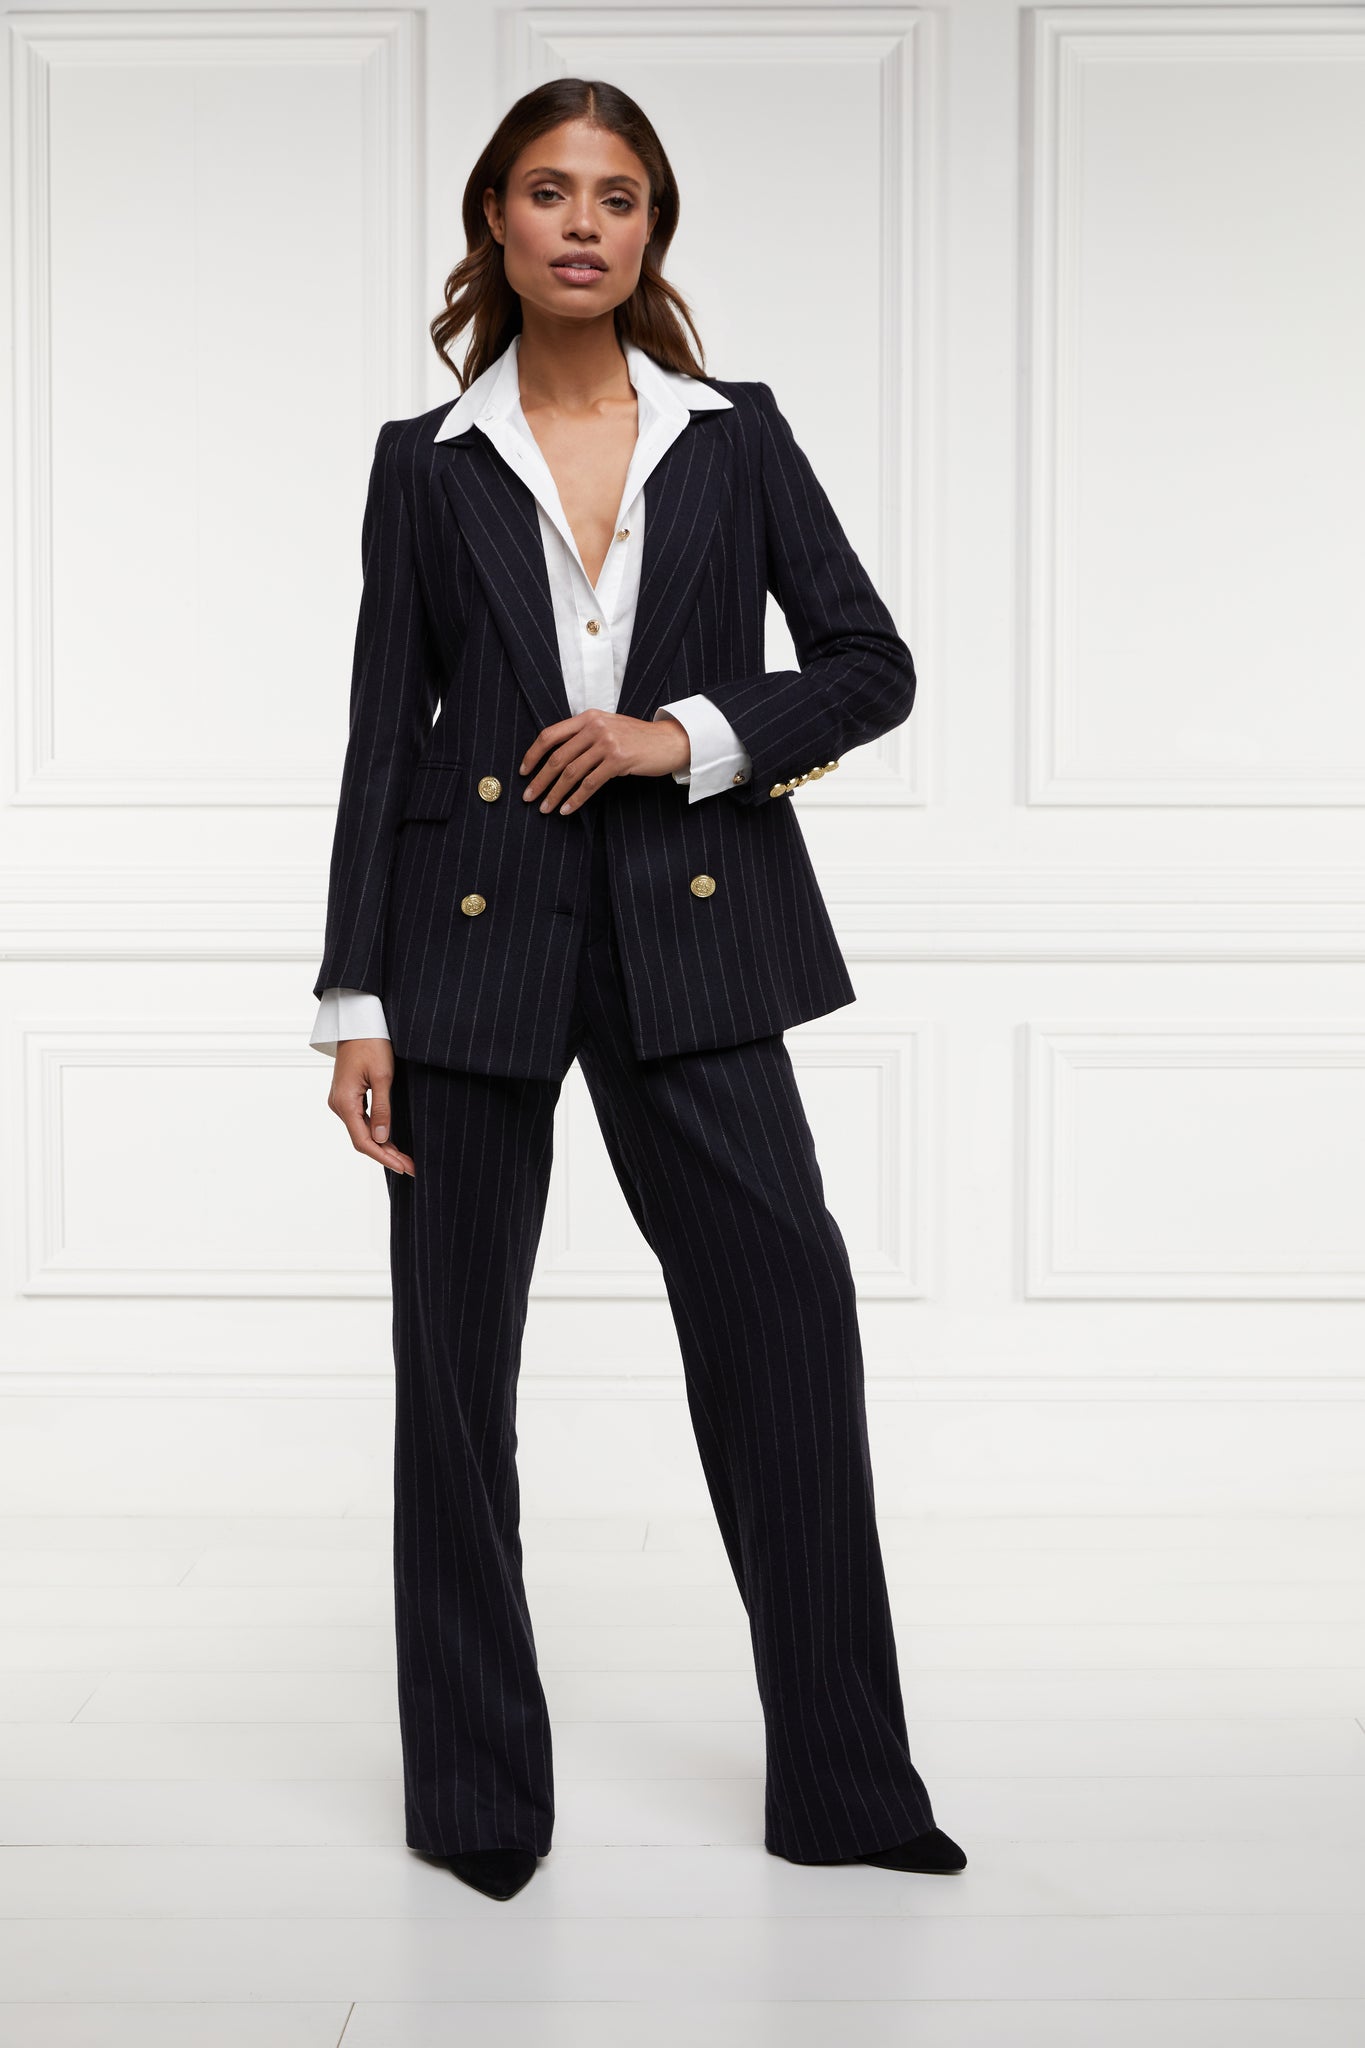 double breasted wool blazer in navy and cream chalk pinstripe with two hip pockets and gold button detials down front and on cuffs and handmade in the uk worn with classic white shirt and tailored trousers in matching pinstripe